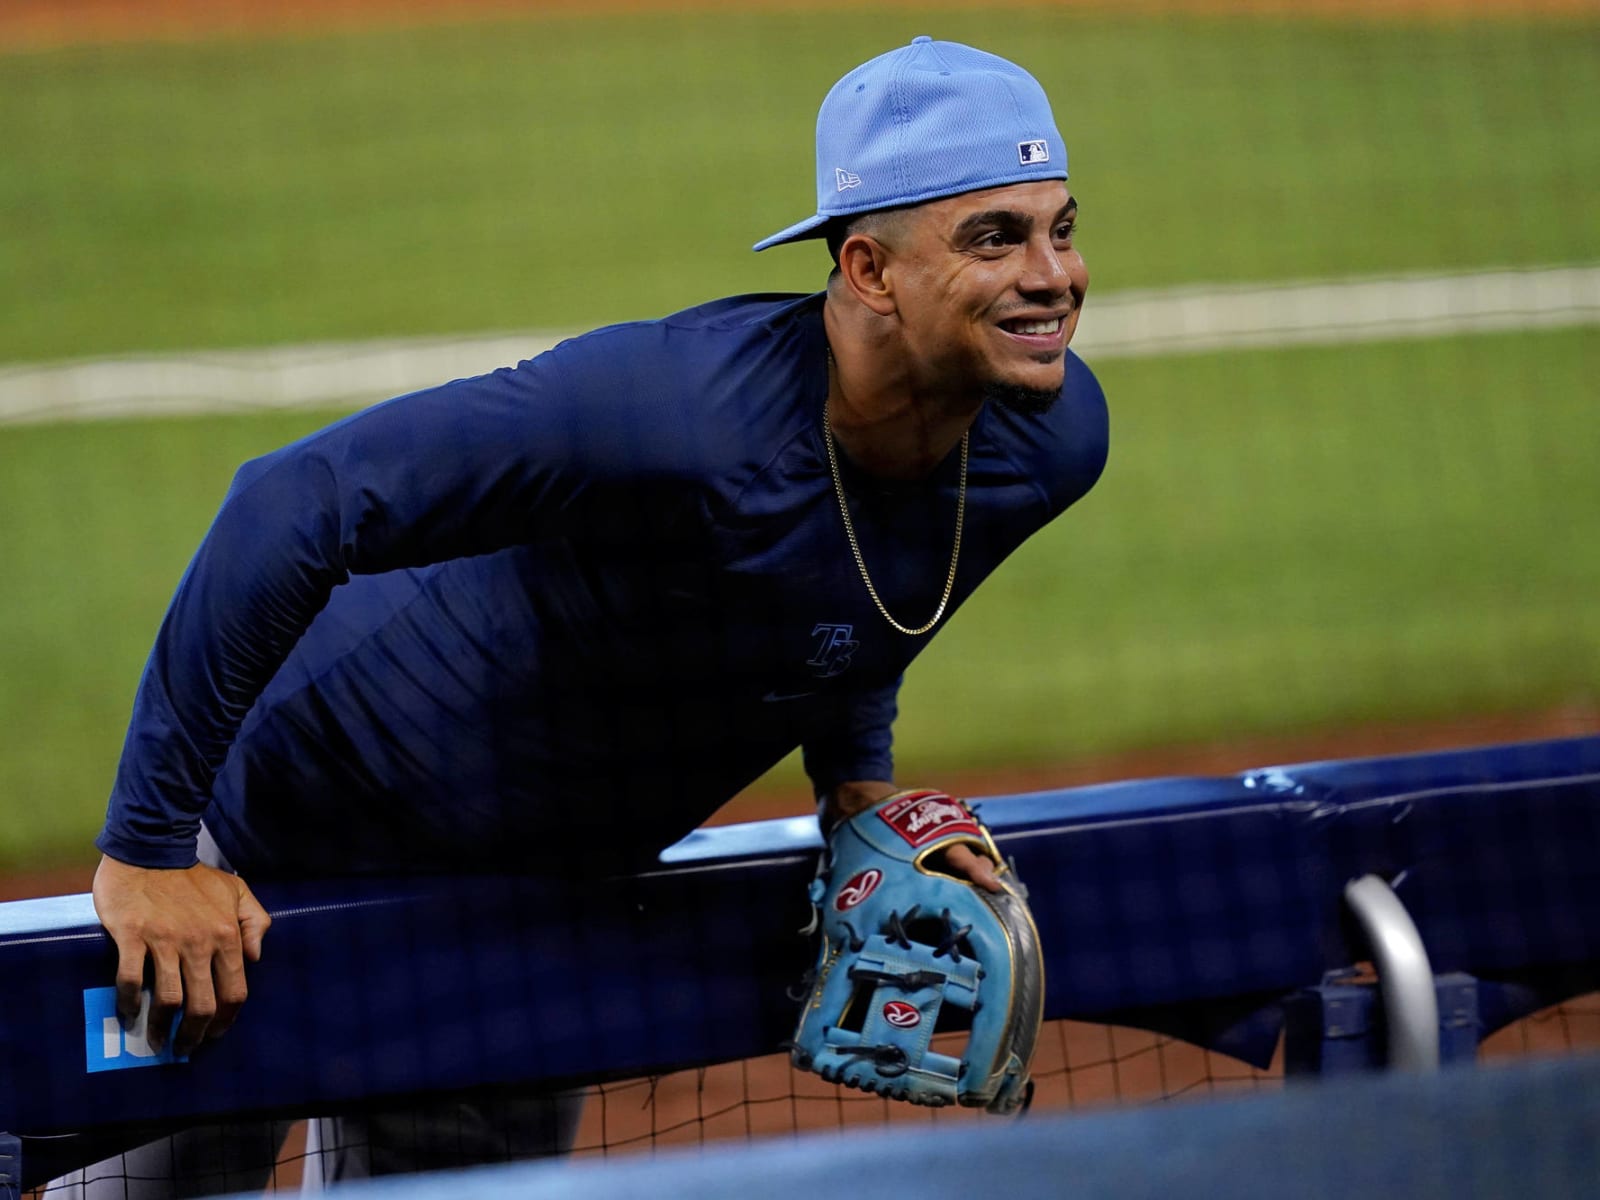 Rays confident Willy Adames' bat will come alive in World Series